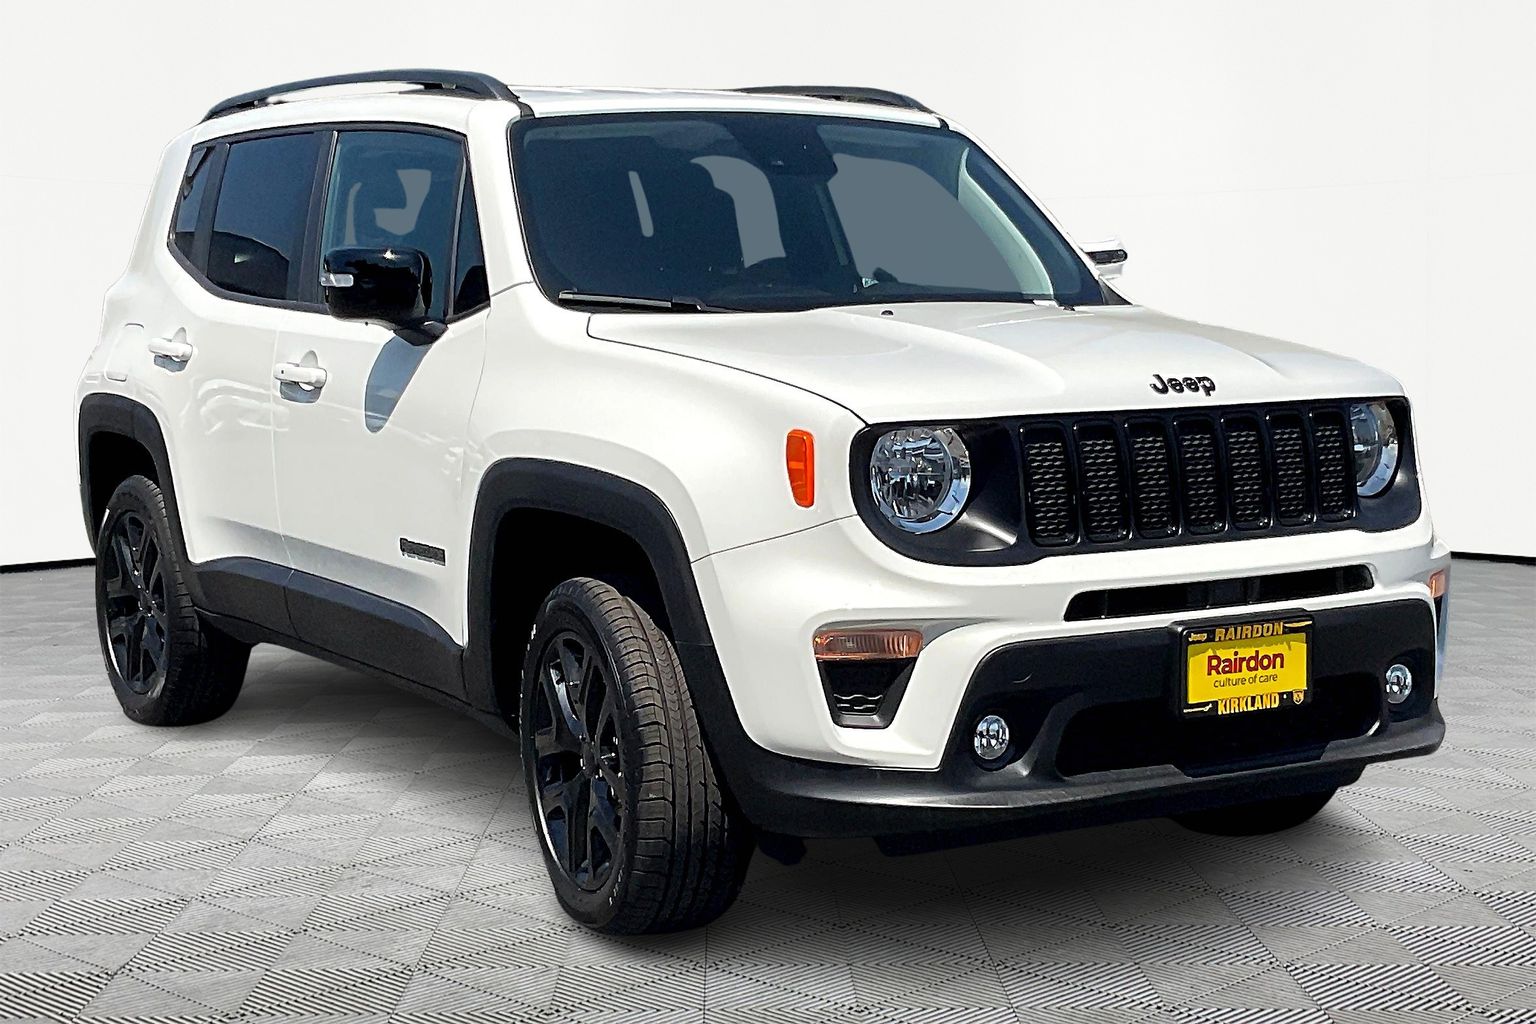 2015 Jeep Renegade Price, Value, Ratings & Reviews